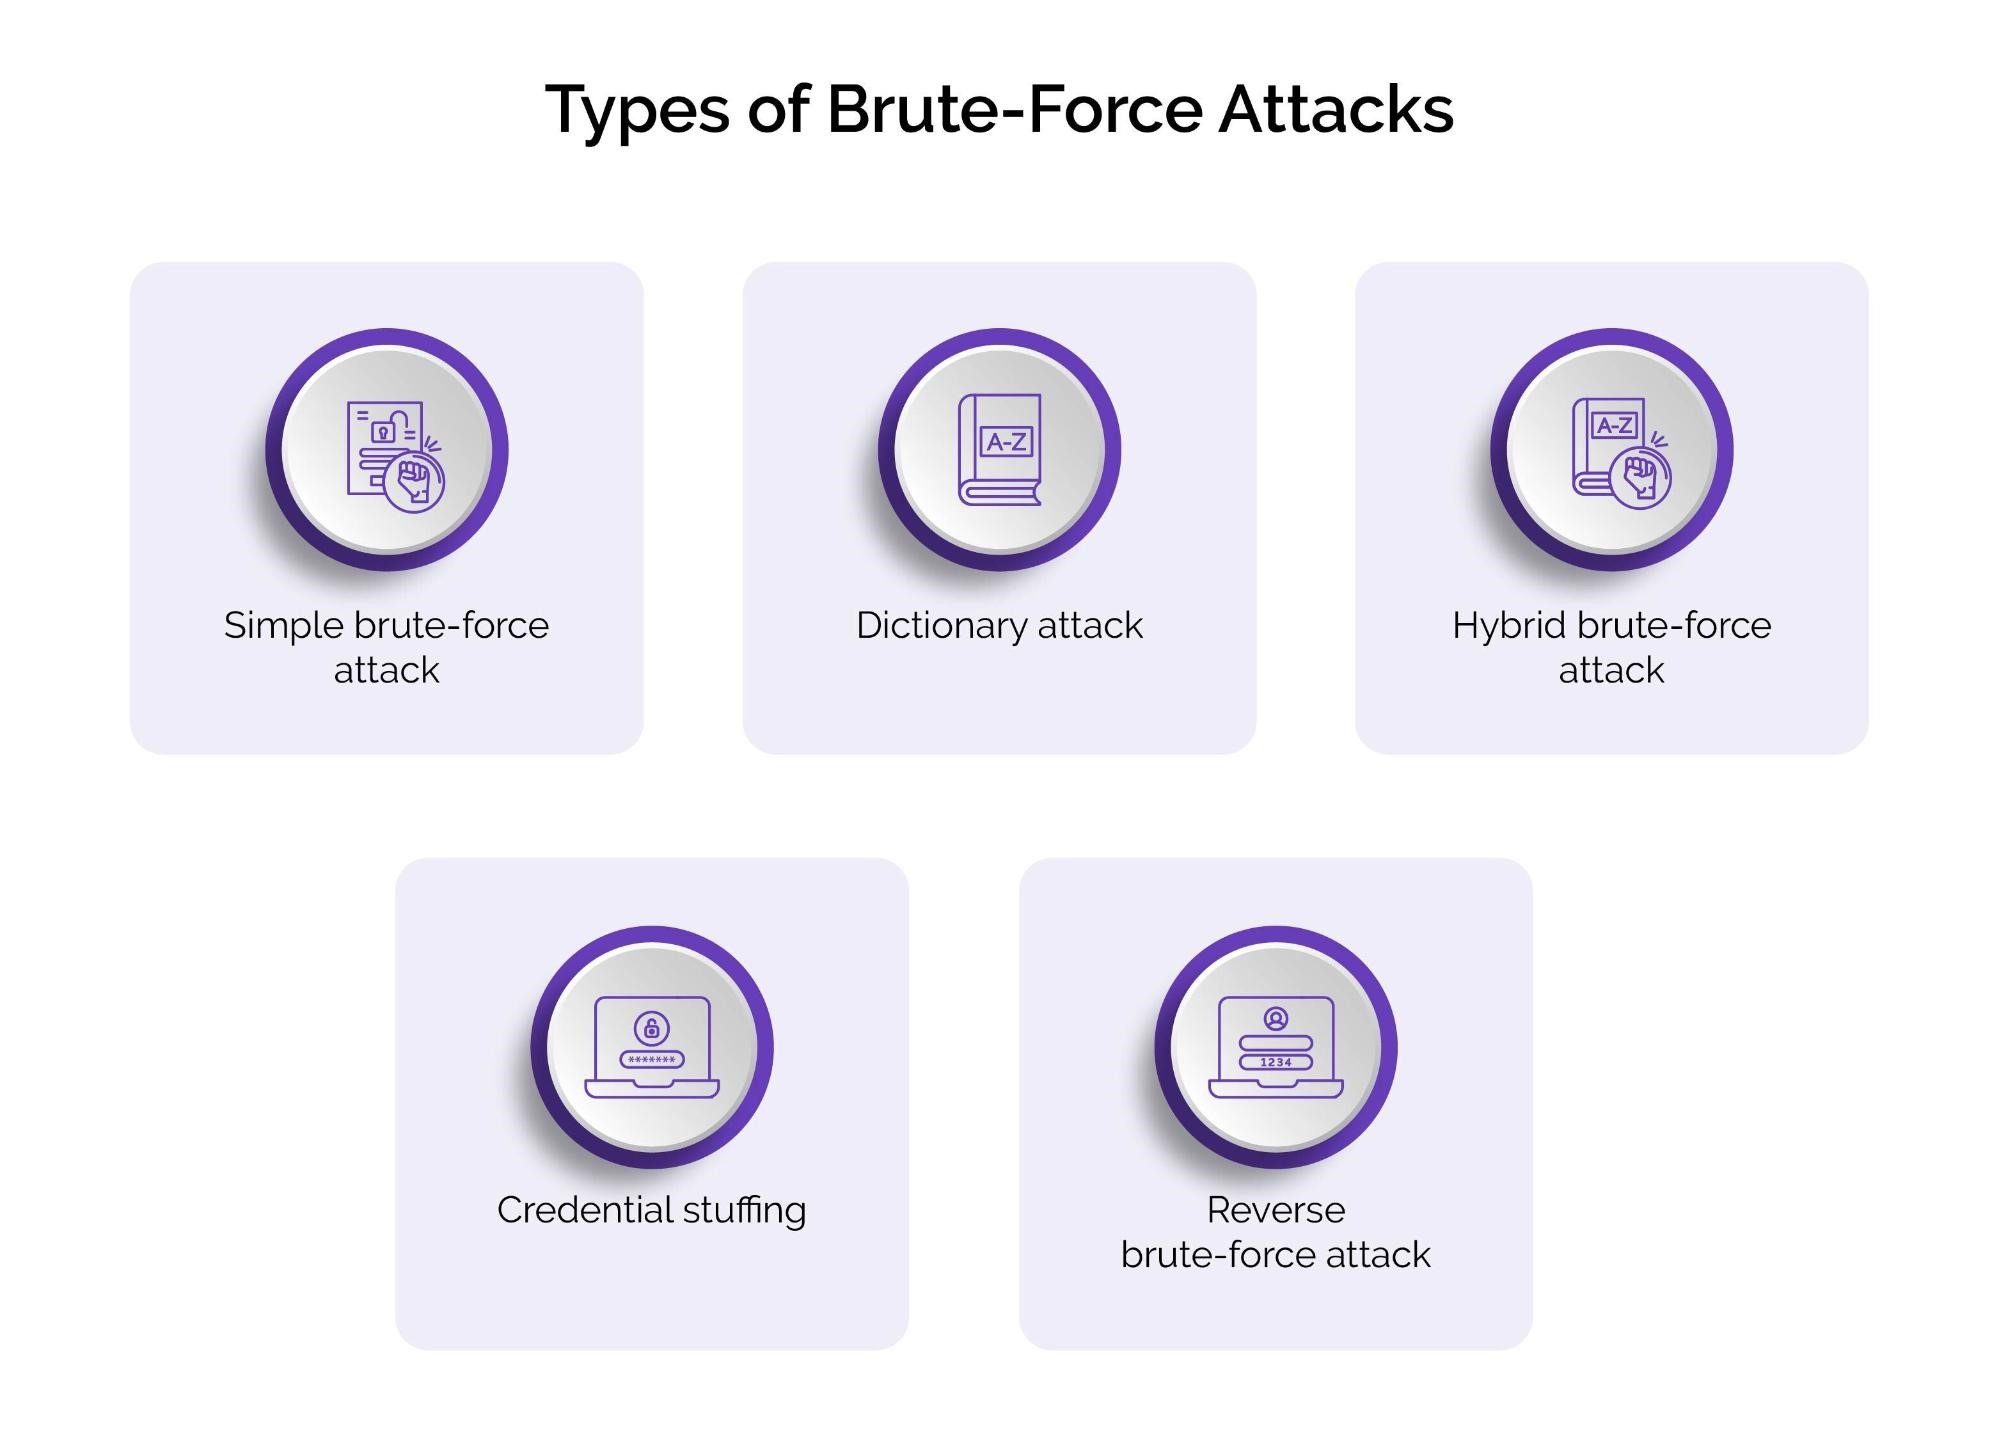 The types of brute force attacks